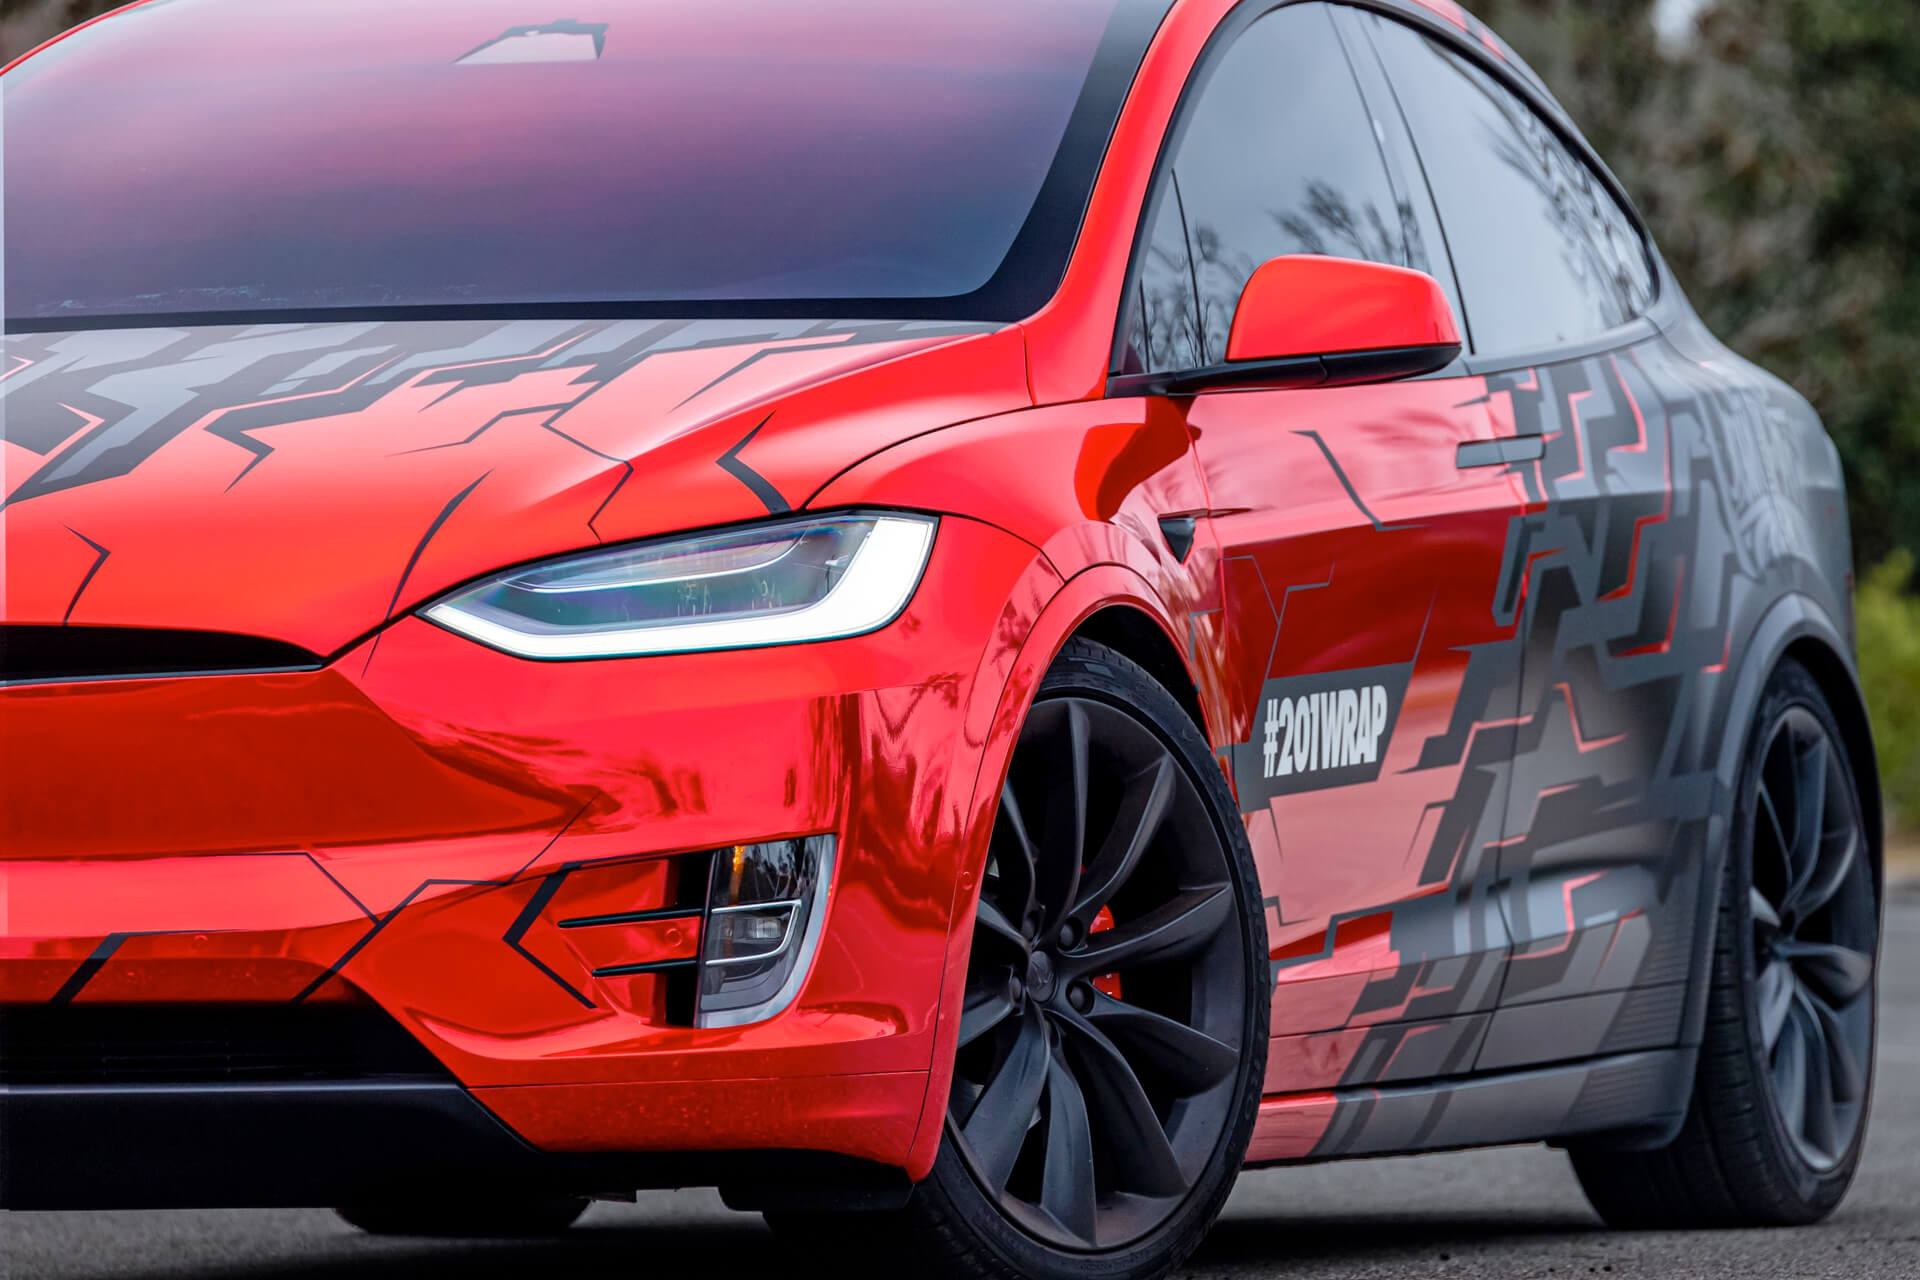 A red and black Tesla SUV.